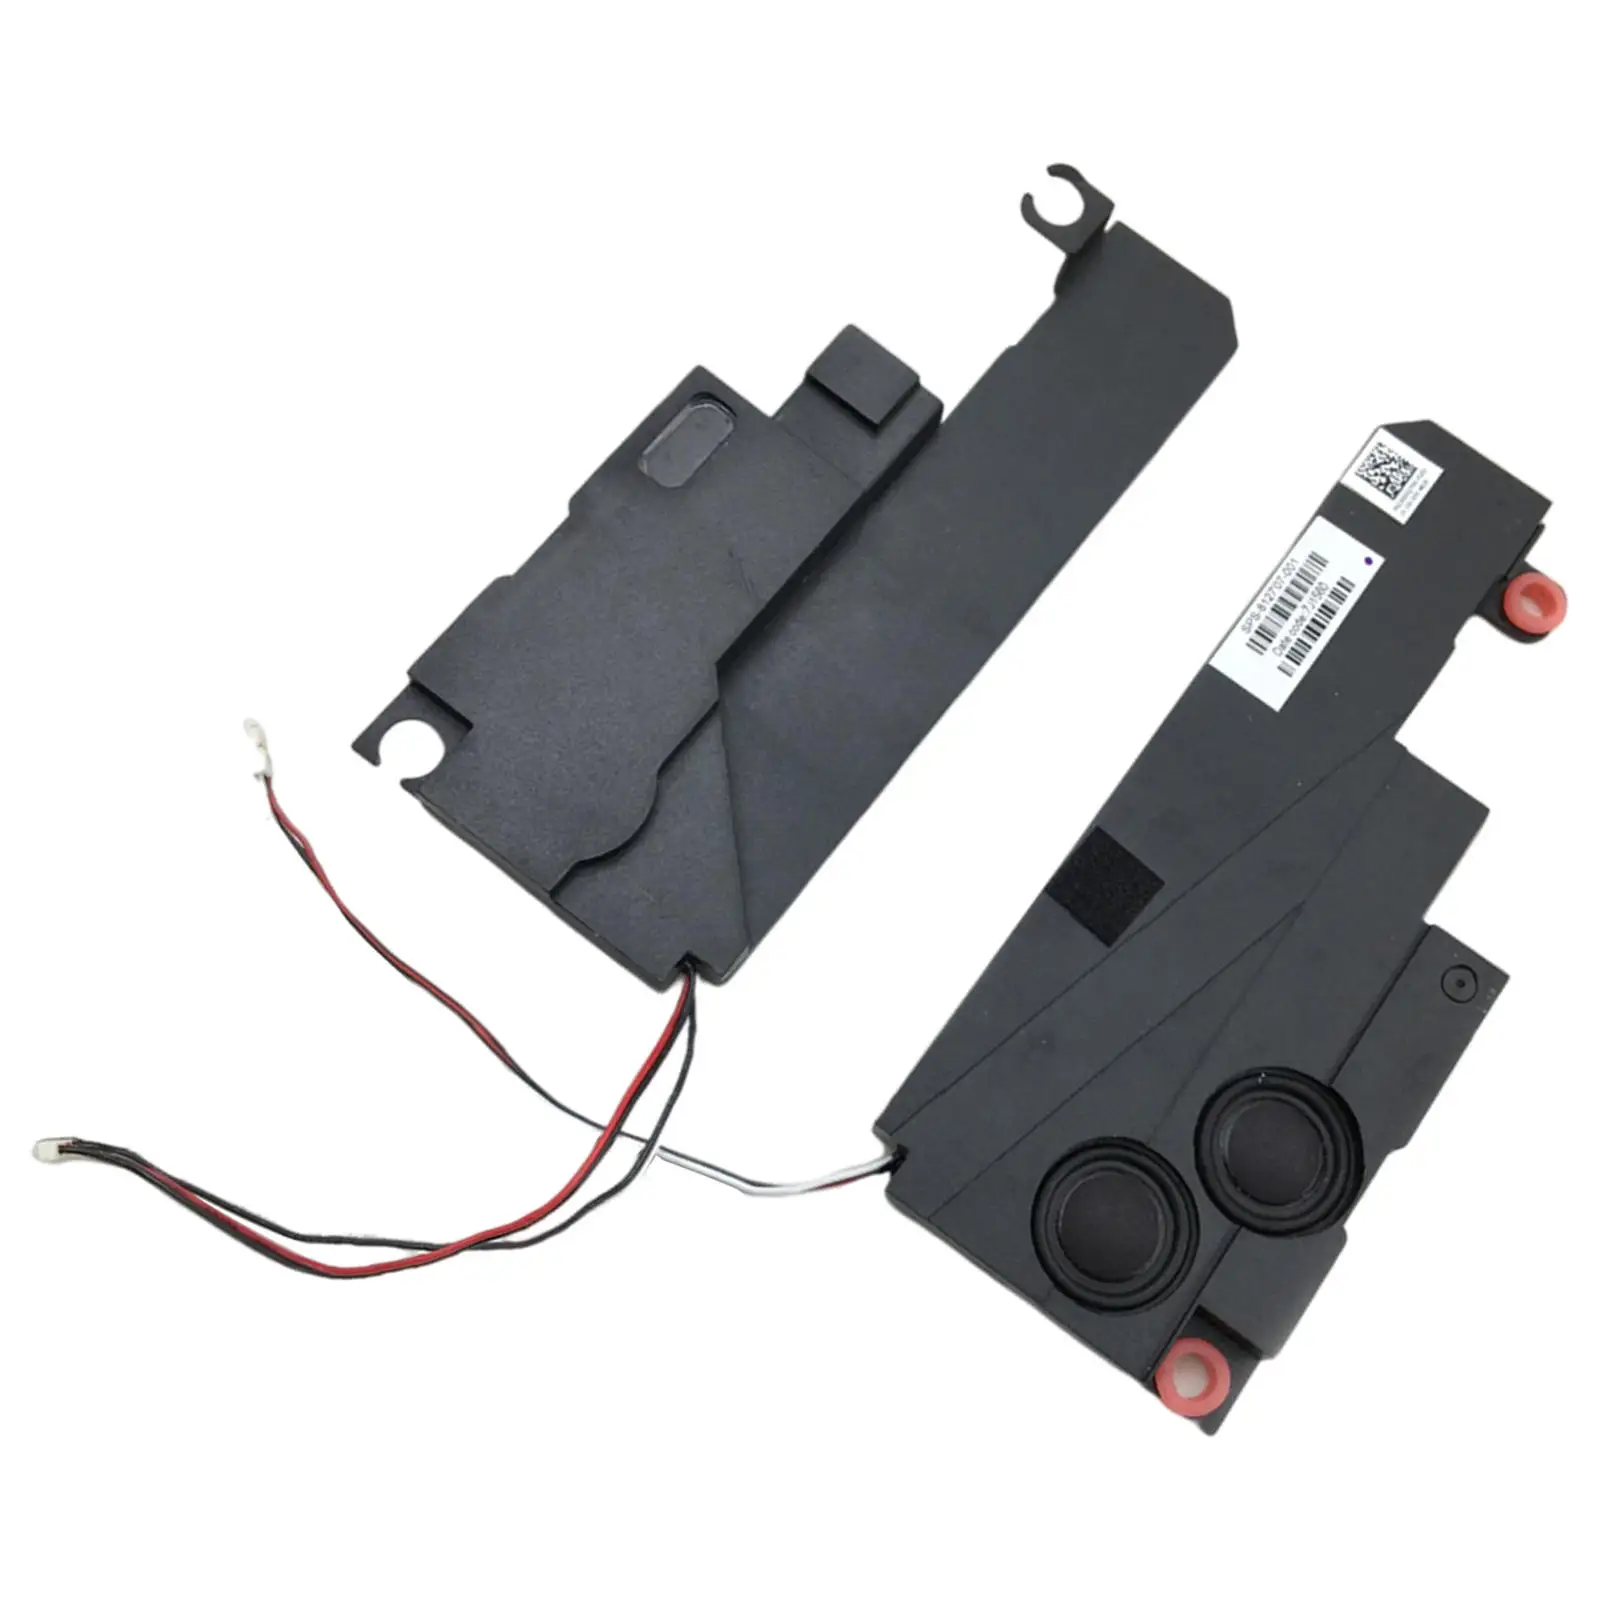 2Pcs Built-In Speakers Replacement L and R Pk23000Qt00 812707-001 for HP Envy 15T 15-Ae 15-Ah Laptop Notebook